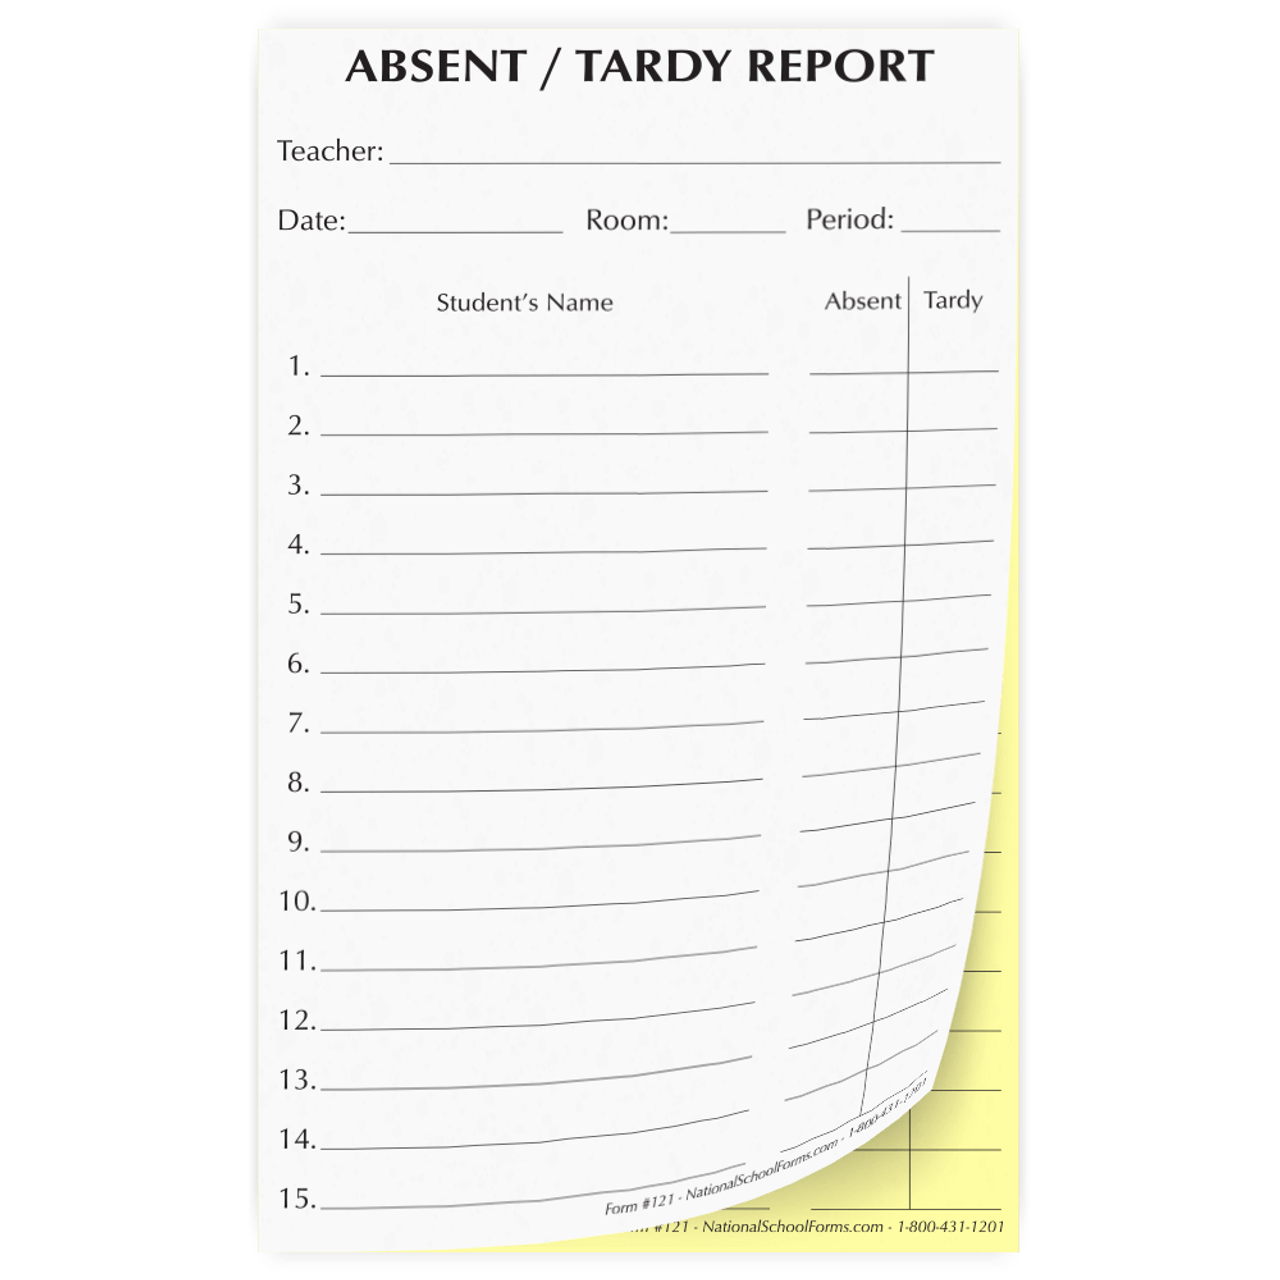 Absent/Tardy Report Slip (121)